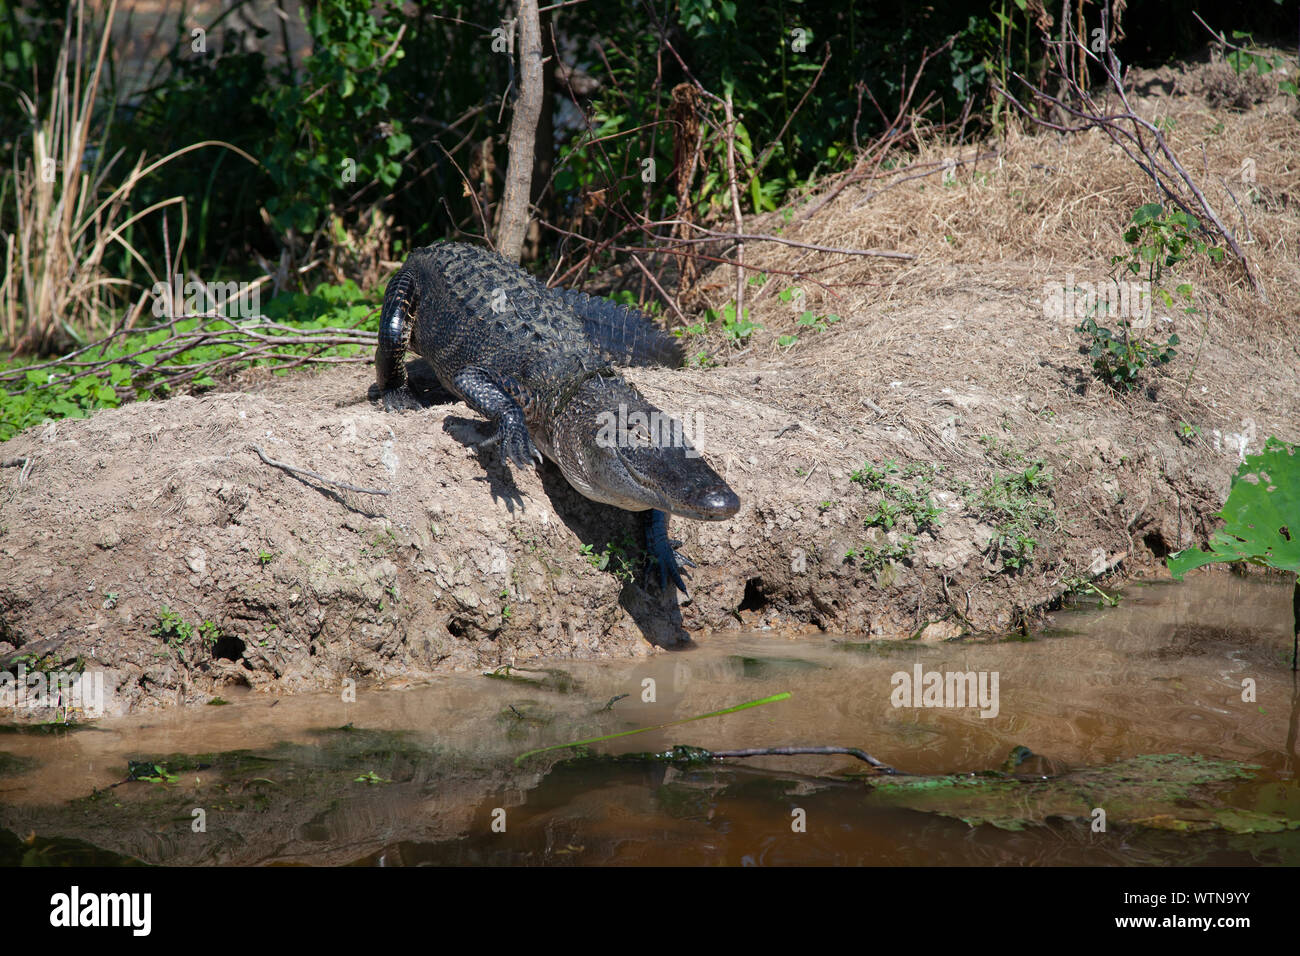 An American alligator on the banks of a lake in East Texas. Stock Photo